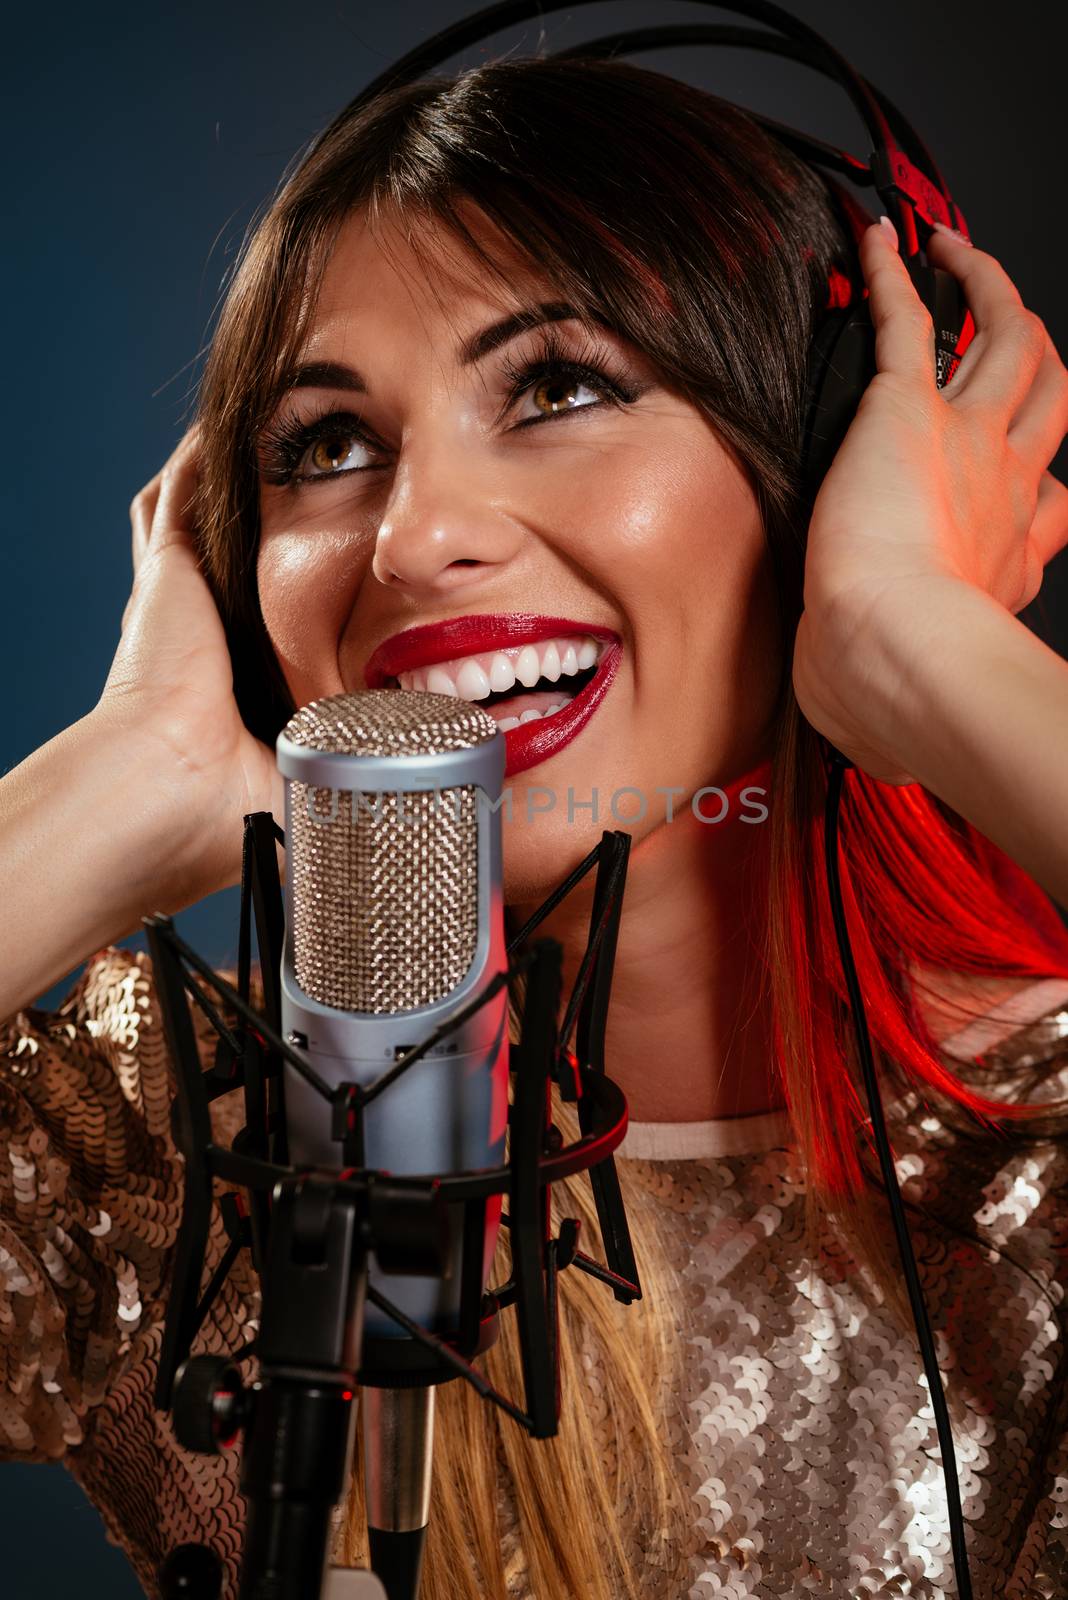 Woman Singer Recording A New Song by MilanMarkovic78